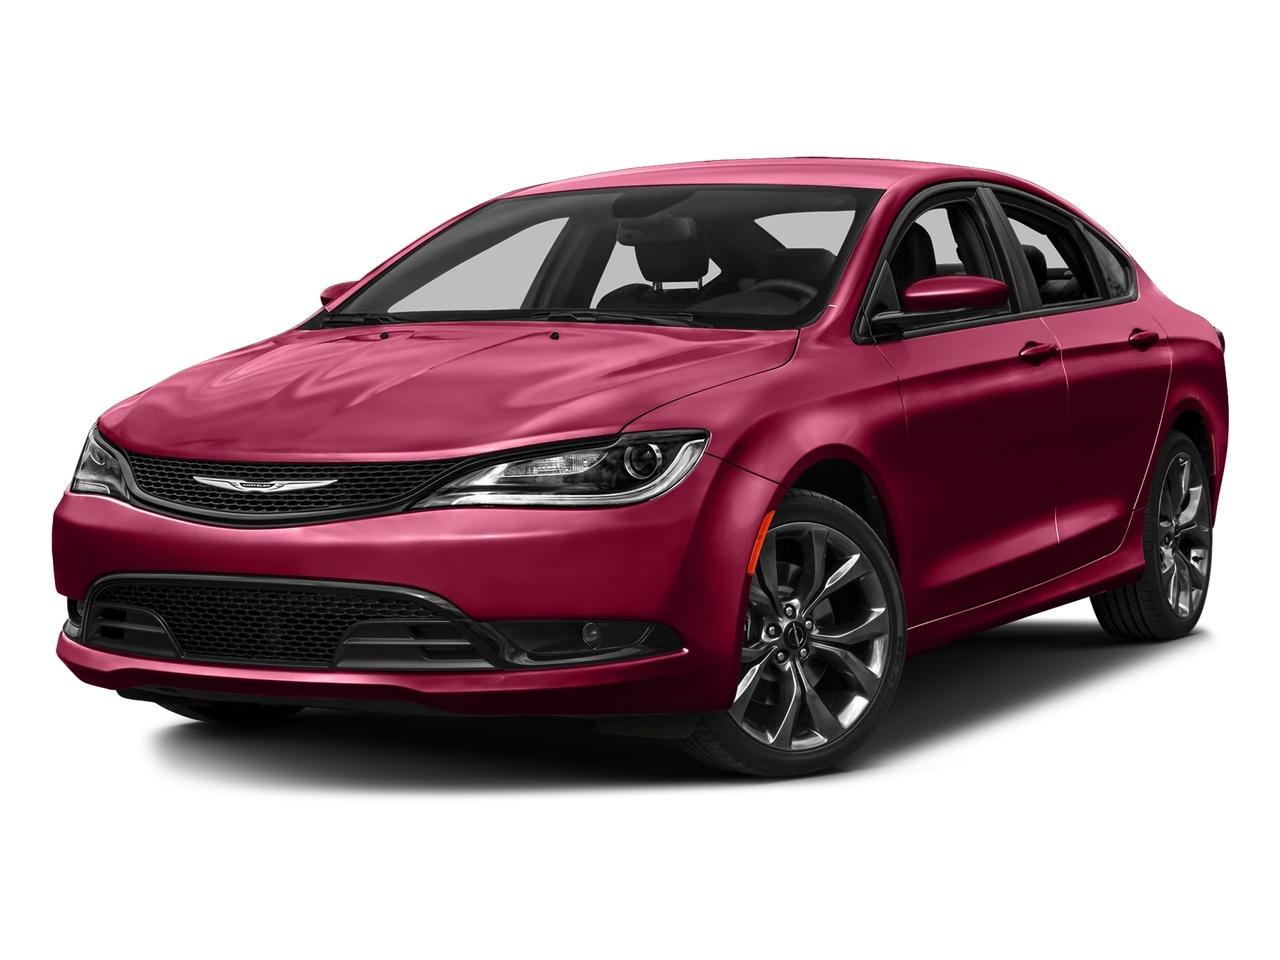 2016 Chrysler 200 Vehicle Photo in Plainfield, IL 60586